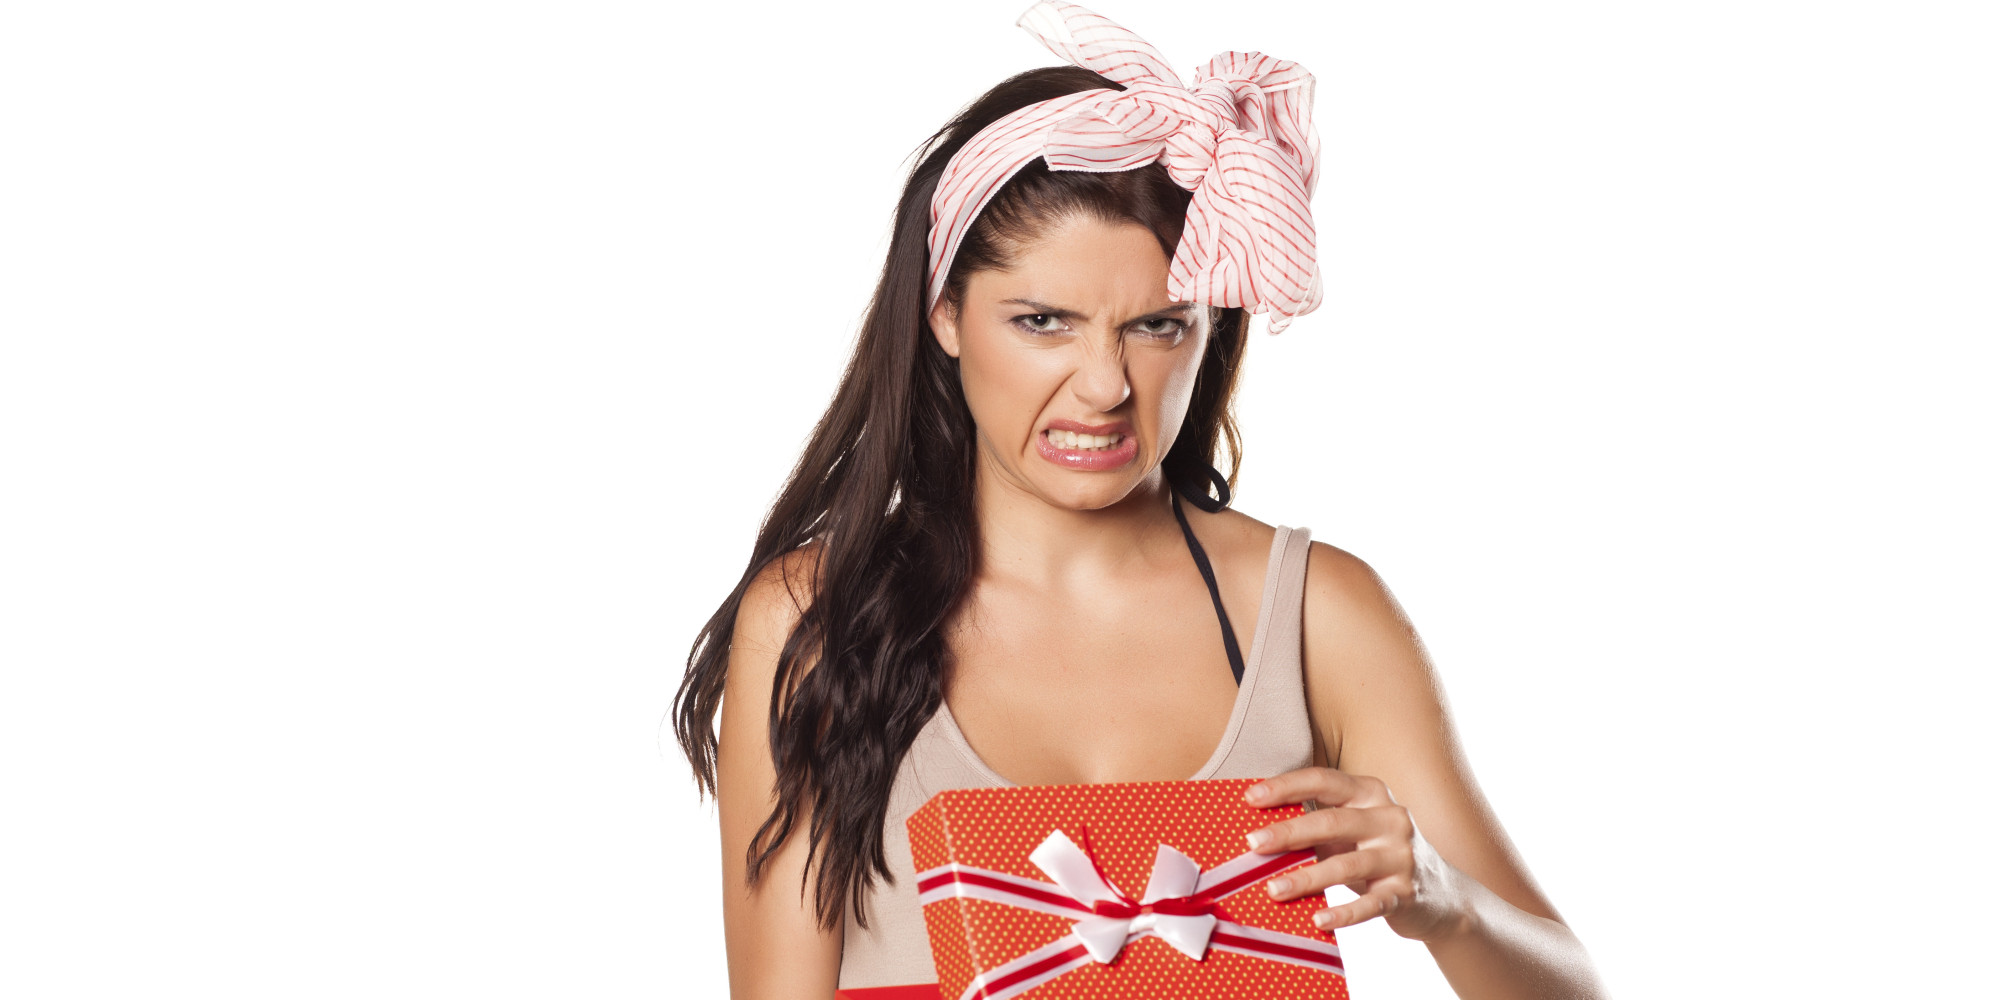 here's what to do and how to handle receiving a gift you don't like.